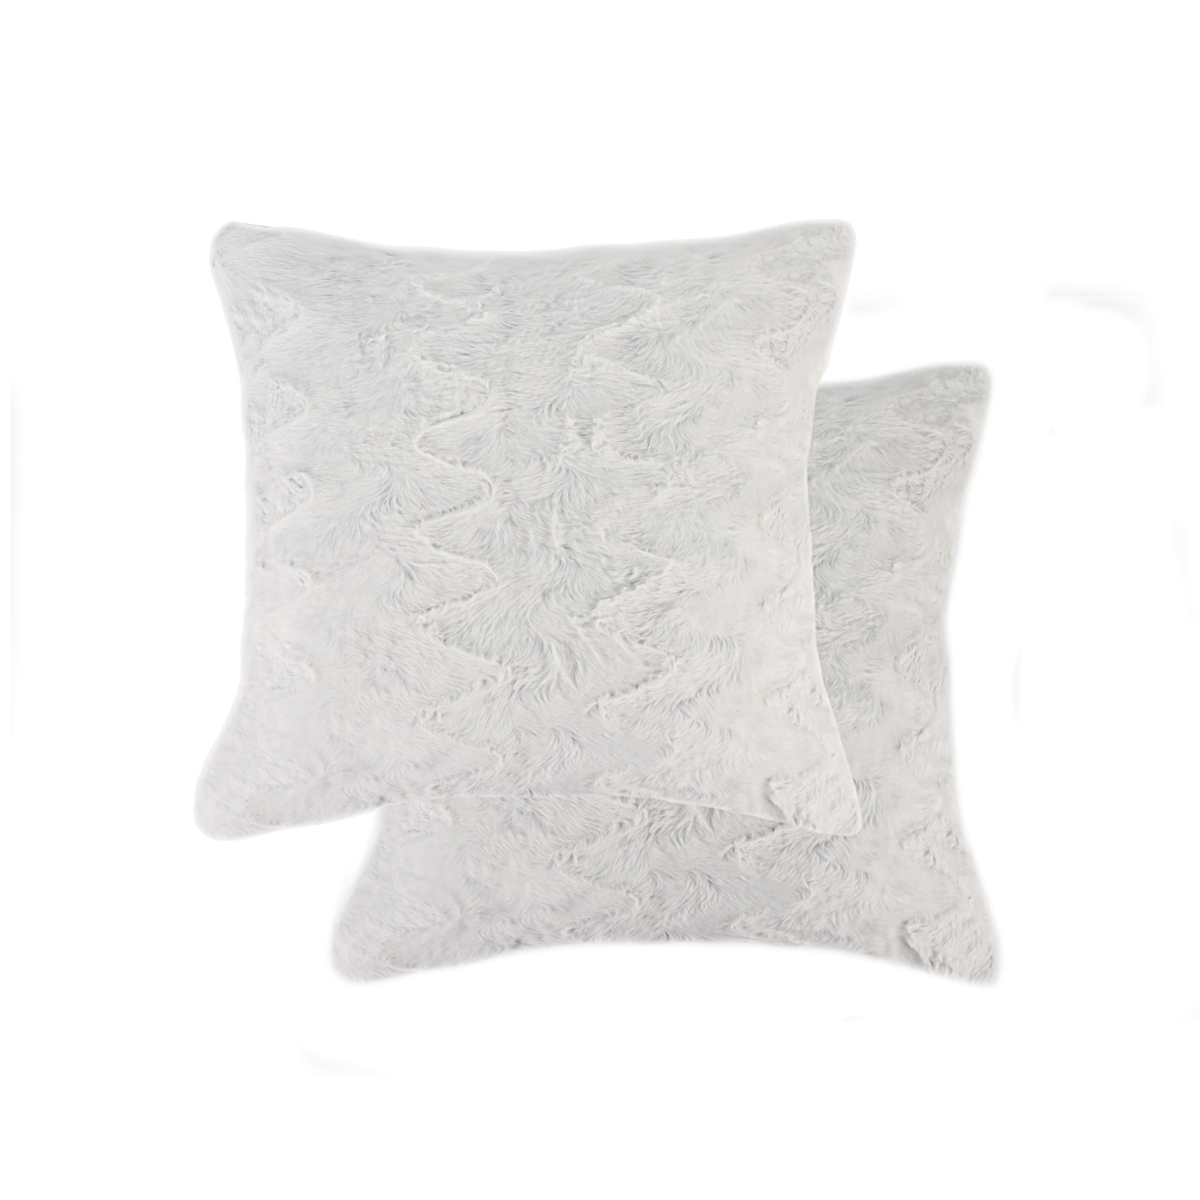 676685046796 18 X 18 In. Belton Throw Pillow - Mink Signature Off White - Pack Of 2